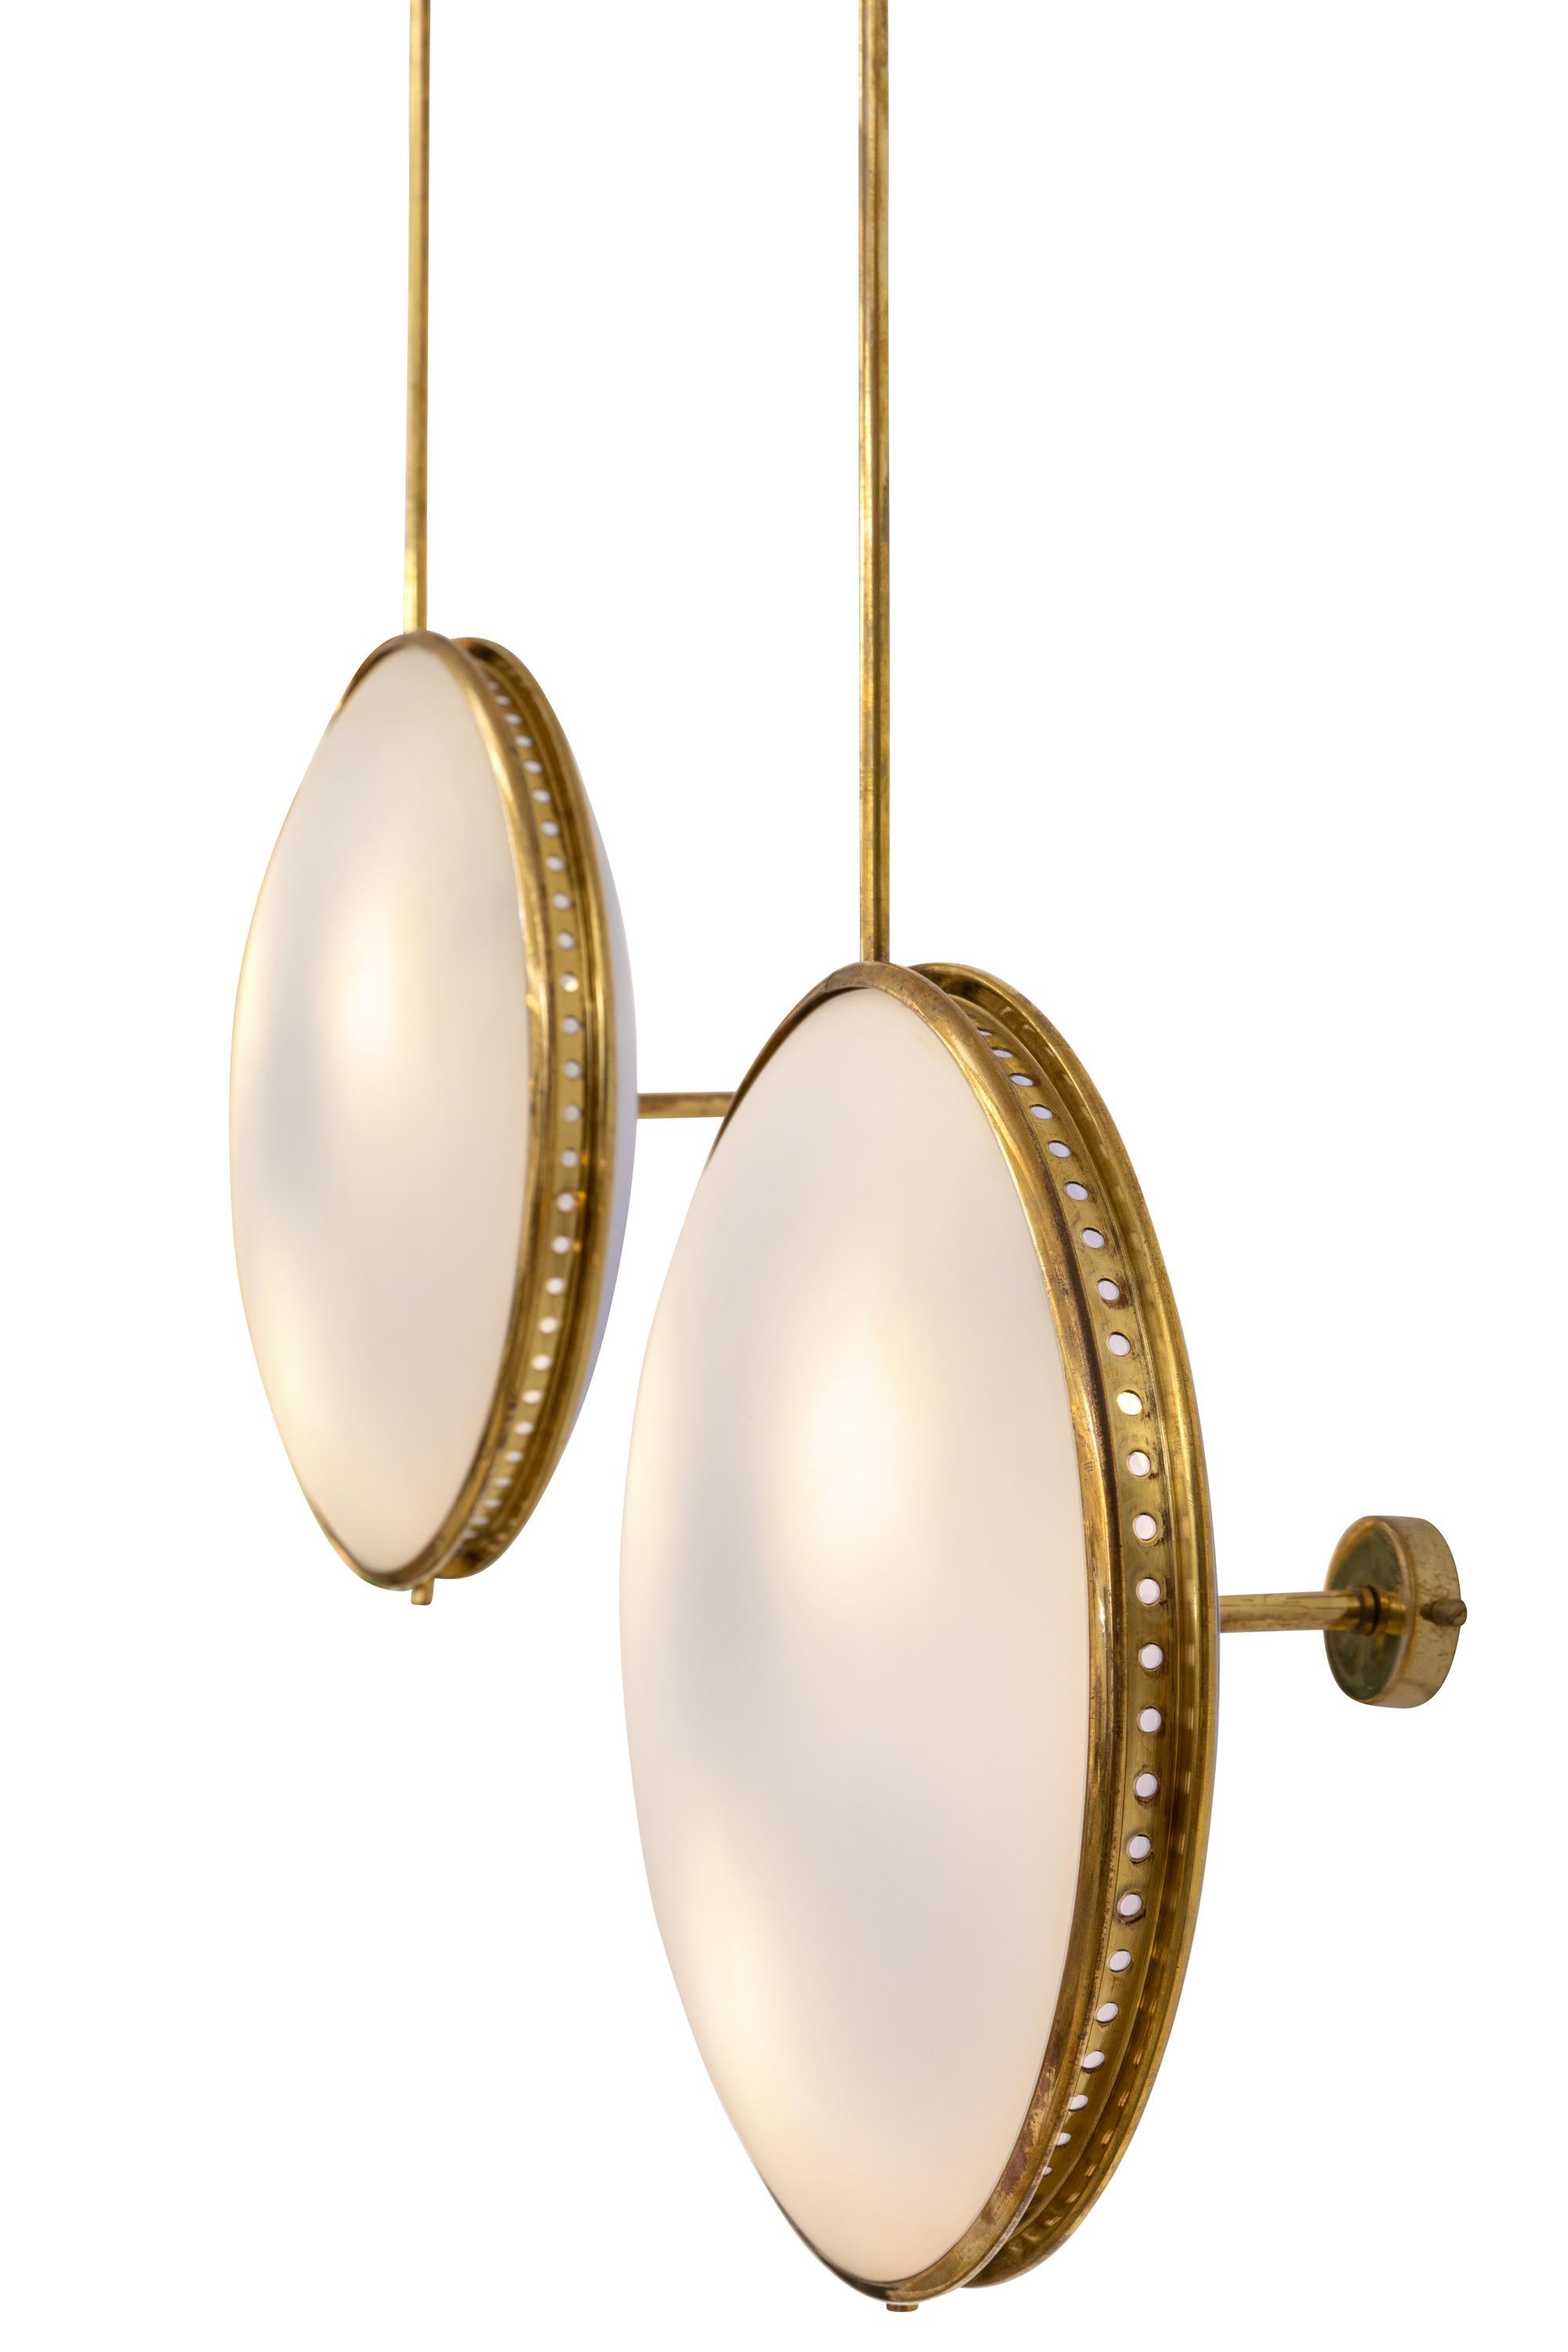 Mid-Century Modern Max Ingrand Ceiling Mounted Wall Lights for Fontana Arte, Italy 1959 For Sale